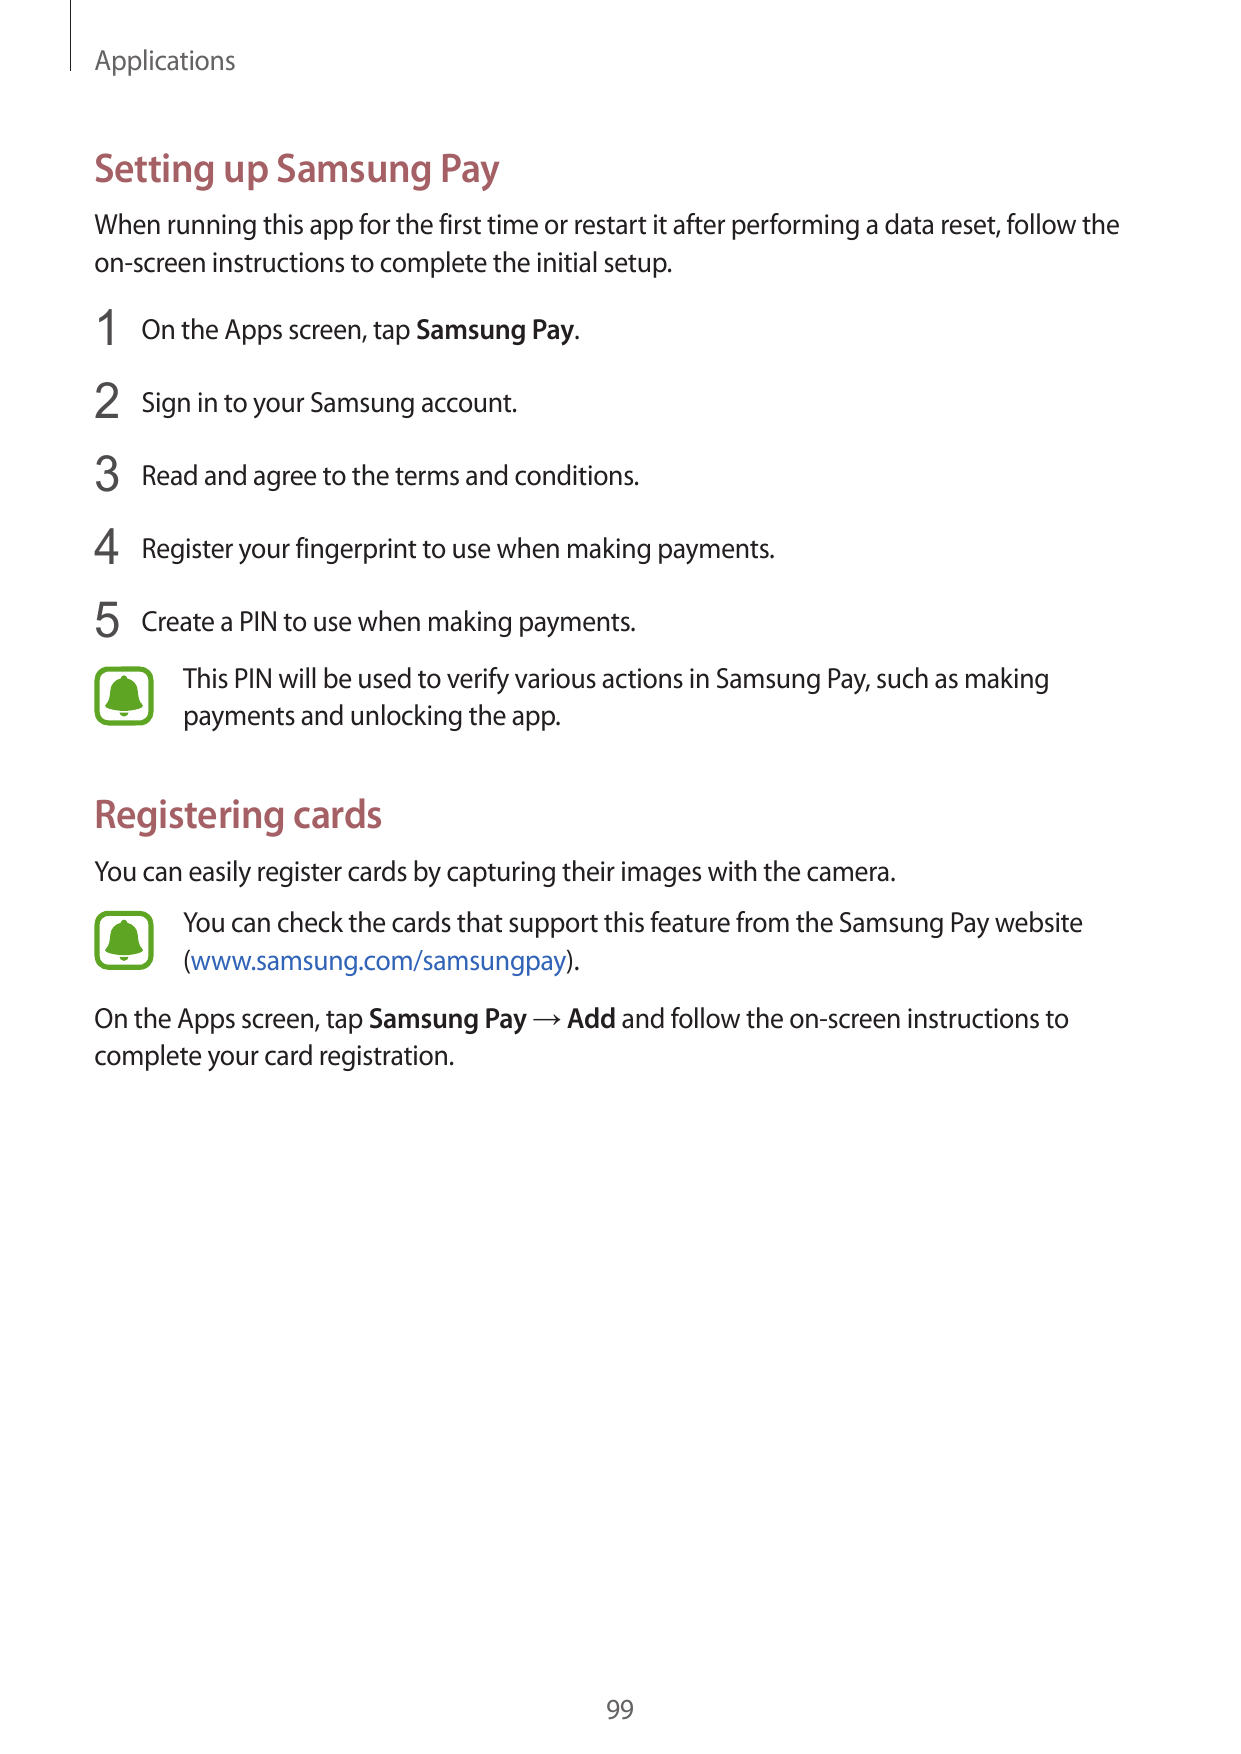 ApplicationsSetting up Samsung PayWhen running this app for the first time or restart it after performing a data reset, follow t